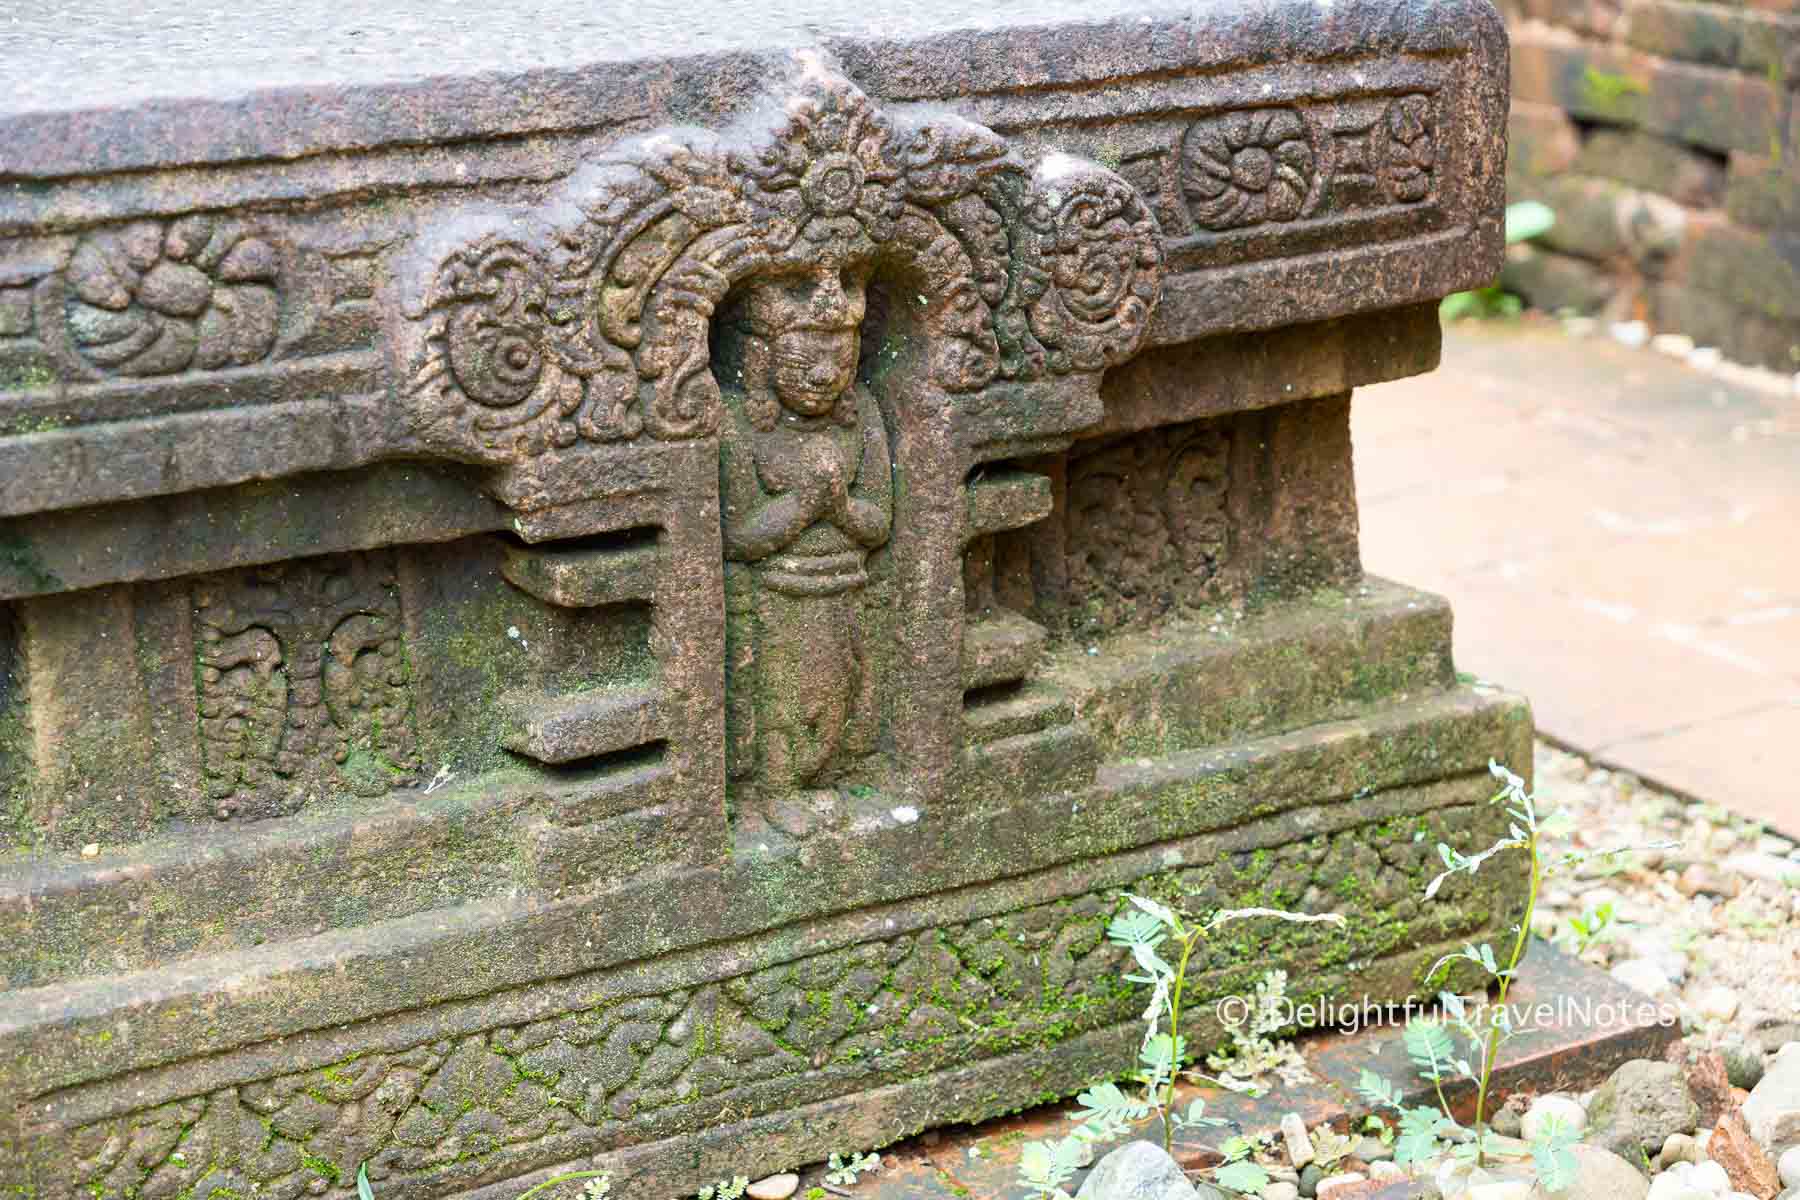 close up look of the vermiculation patterns and carvings at the base of temple A10 pedestal.